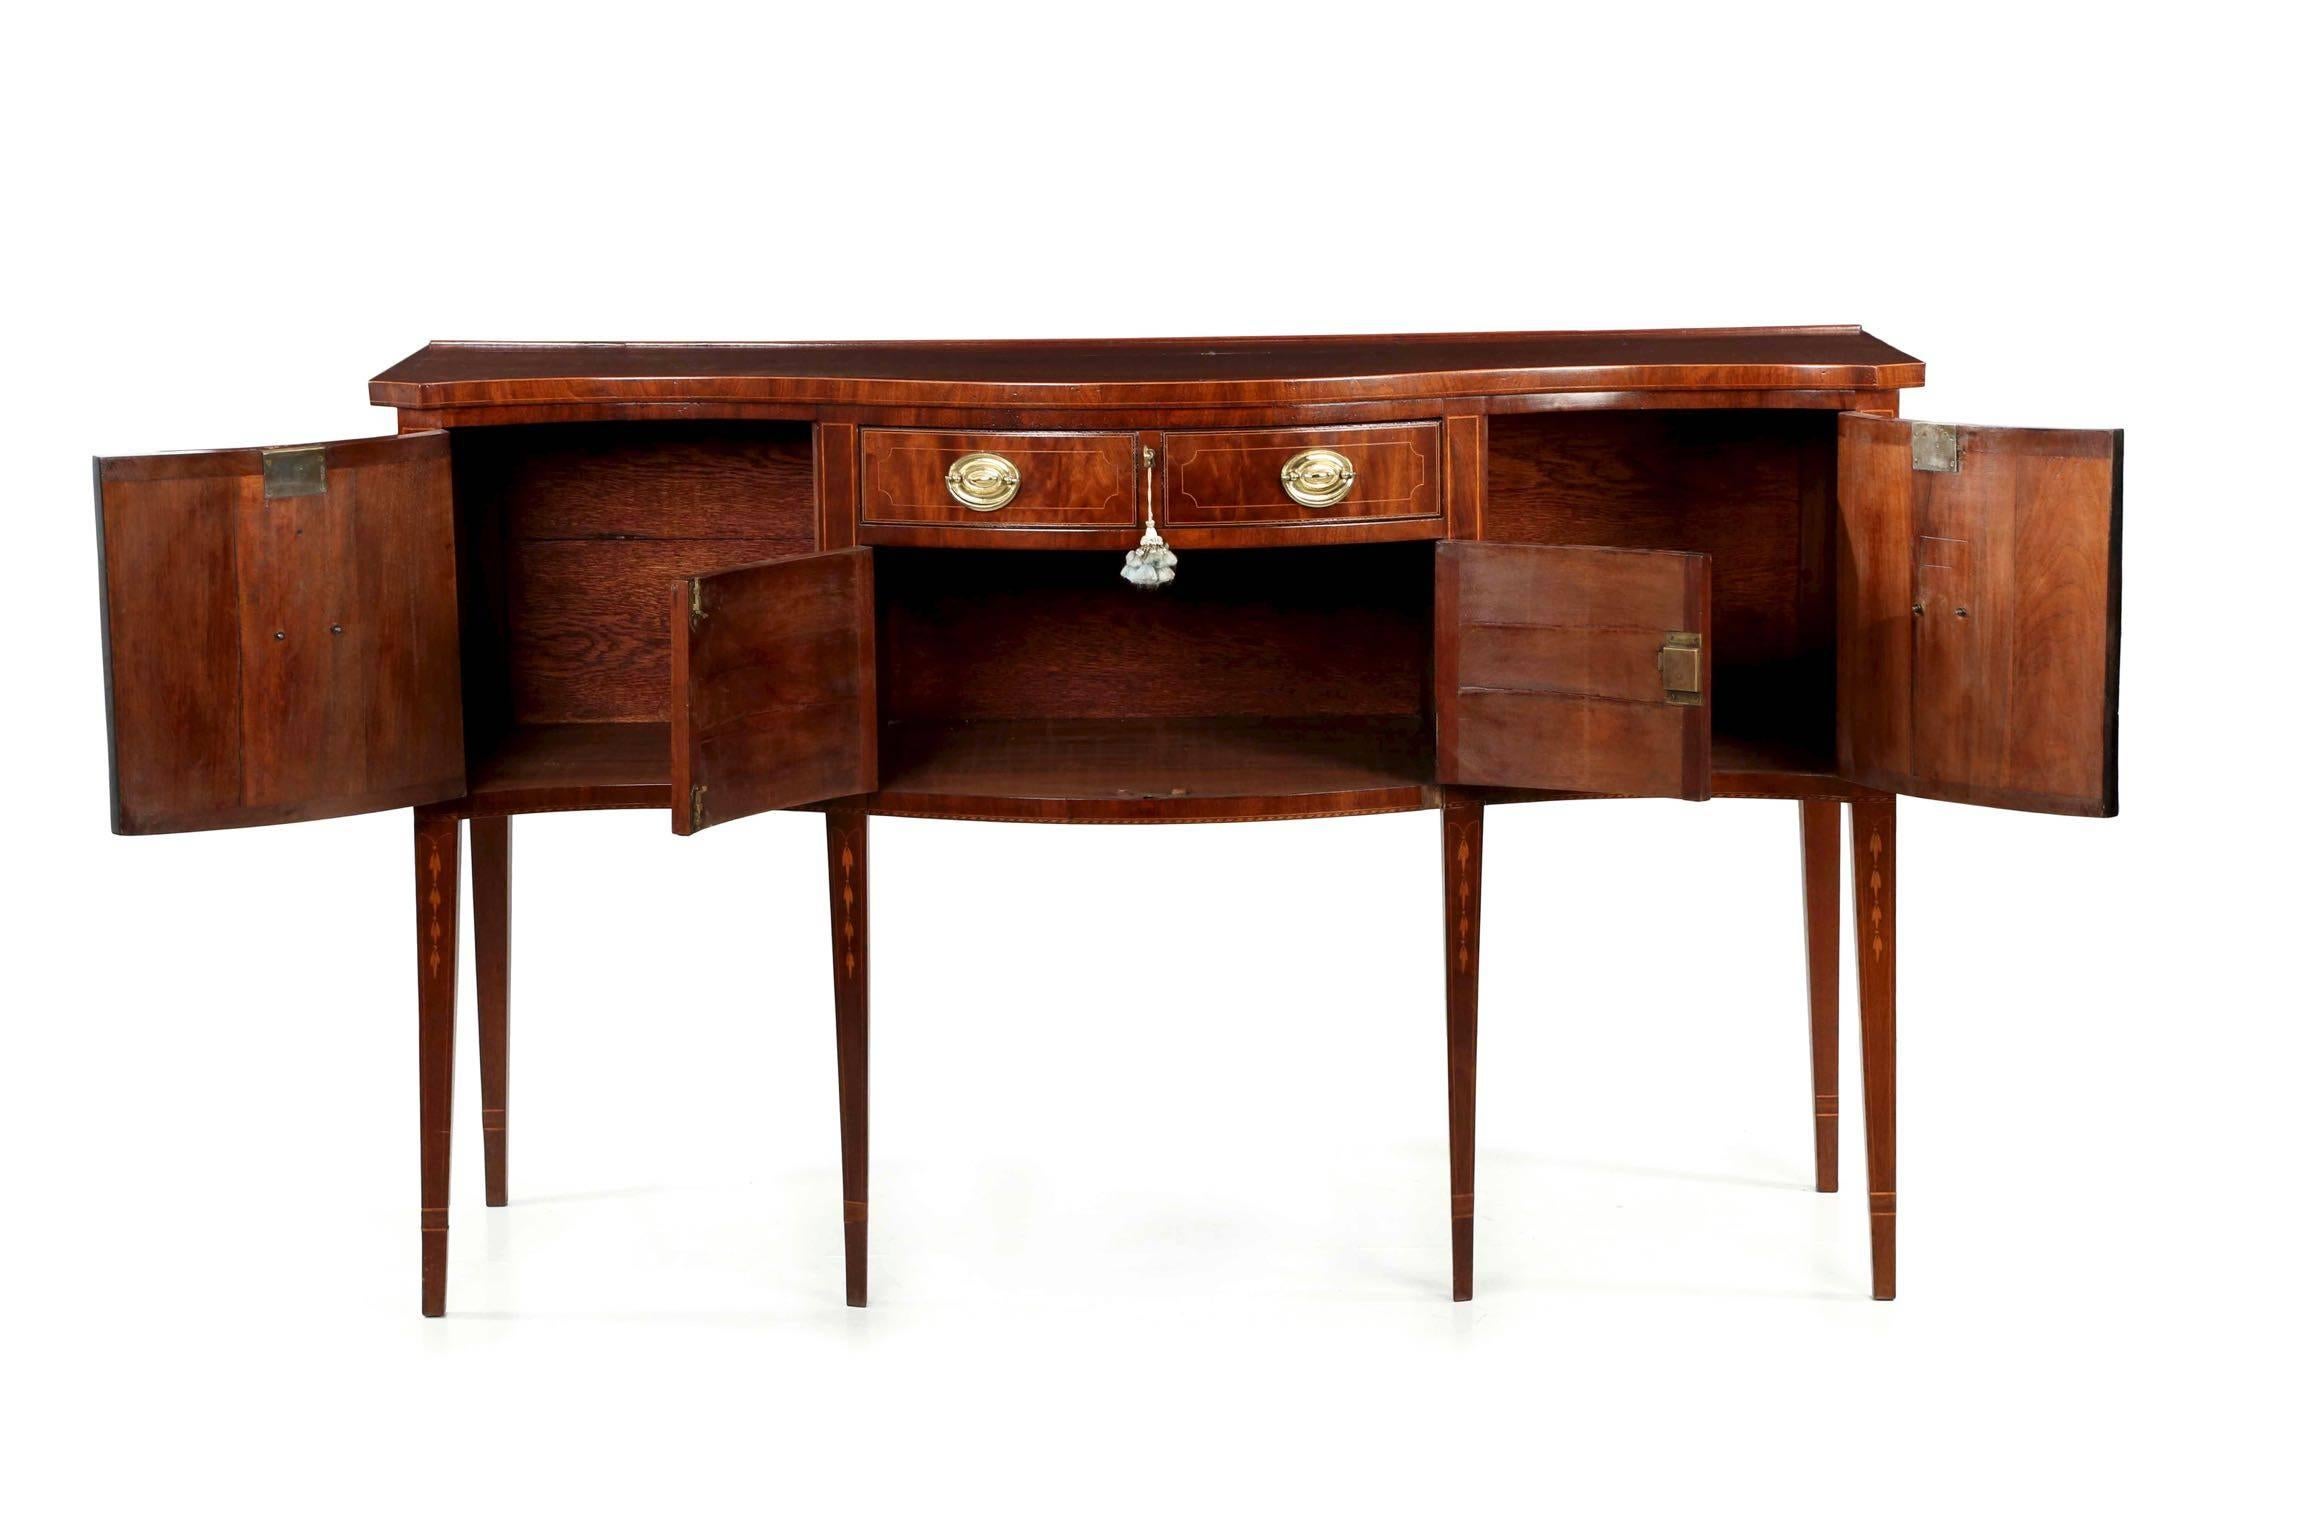 This gorgeous handmade sideboard is executed in the taste of the prior century in the spirit of the Centennial. Precise and finely crafted, the sideboard boasts excellent choice in mahogany, both veneered and of the solid. The top has a soft